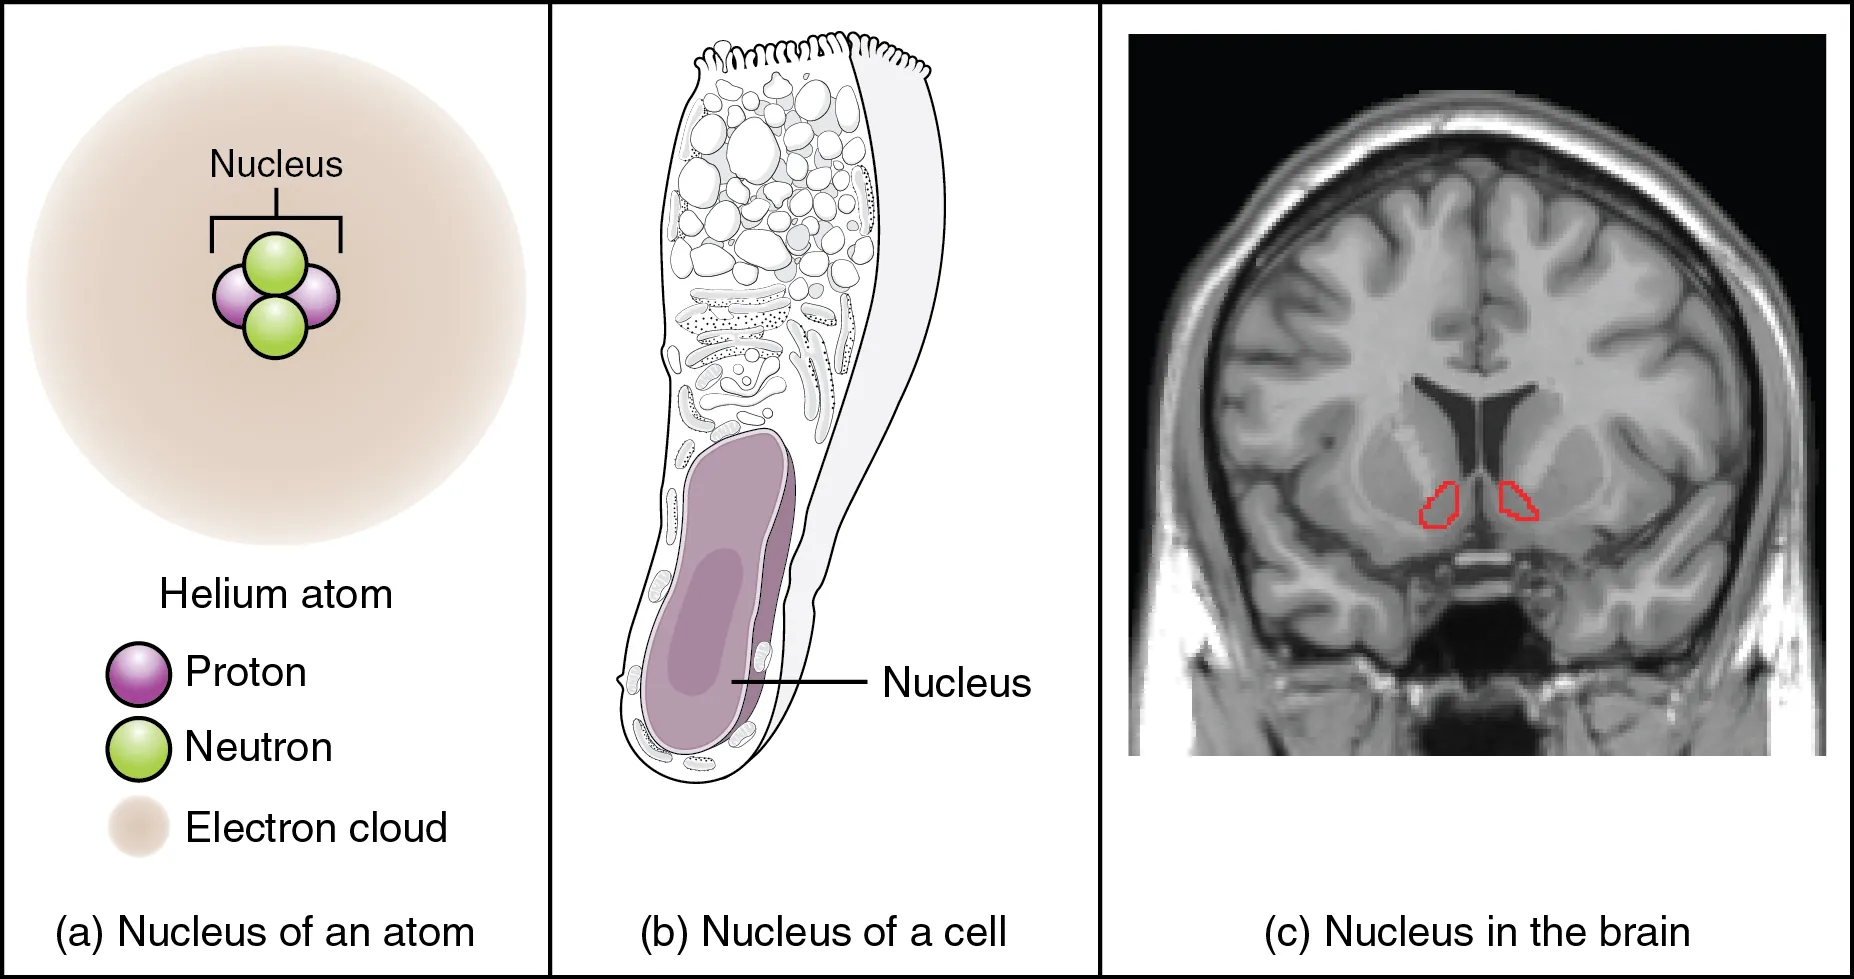 This figure shows two diagrams and a photo, labeled A, B, and C. Image A shows an atom composed of two neutrons and two protons surrounded by a hazy electron cloud. The nucleus of the atom is where the protons and neutrons are located. Image B shows a trumpet shaped cell with a large, oval nucleus near its narrow end. This is the nucleus of a cell. Image C shows an MRI capture of the brain. Two red areas near the center of the brain are highlighted in red. These are the nuclei within the brain.